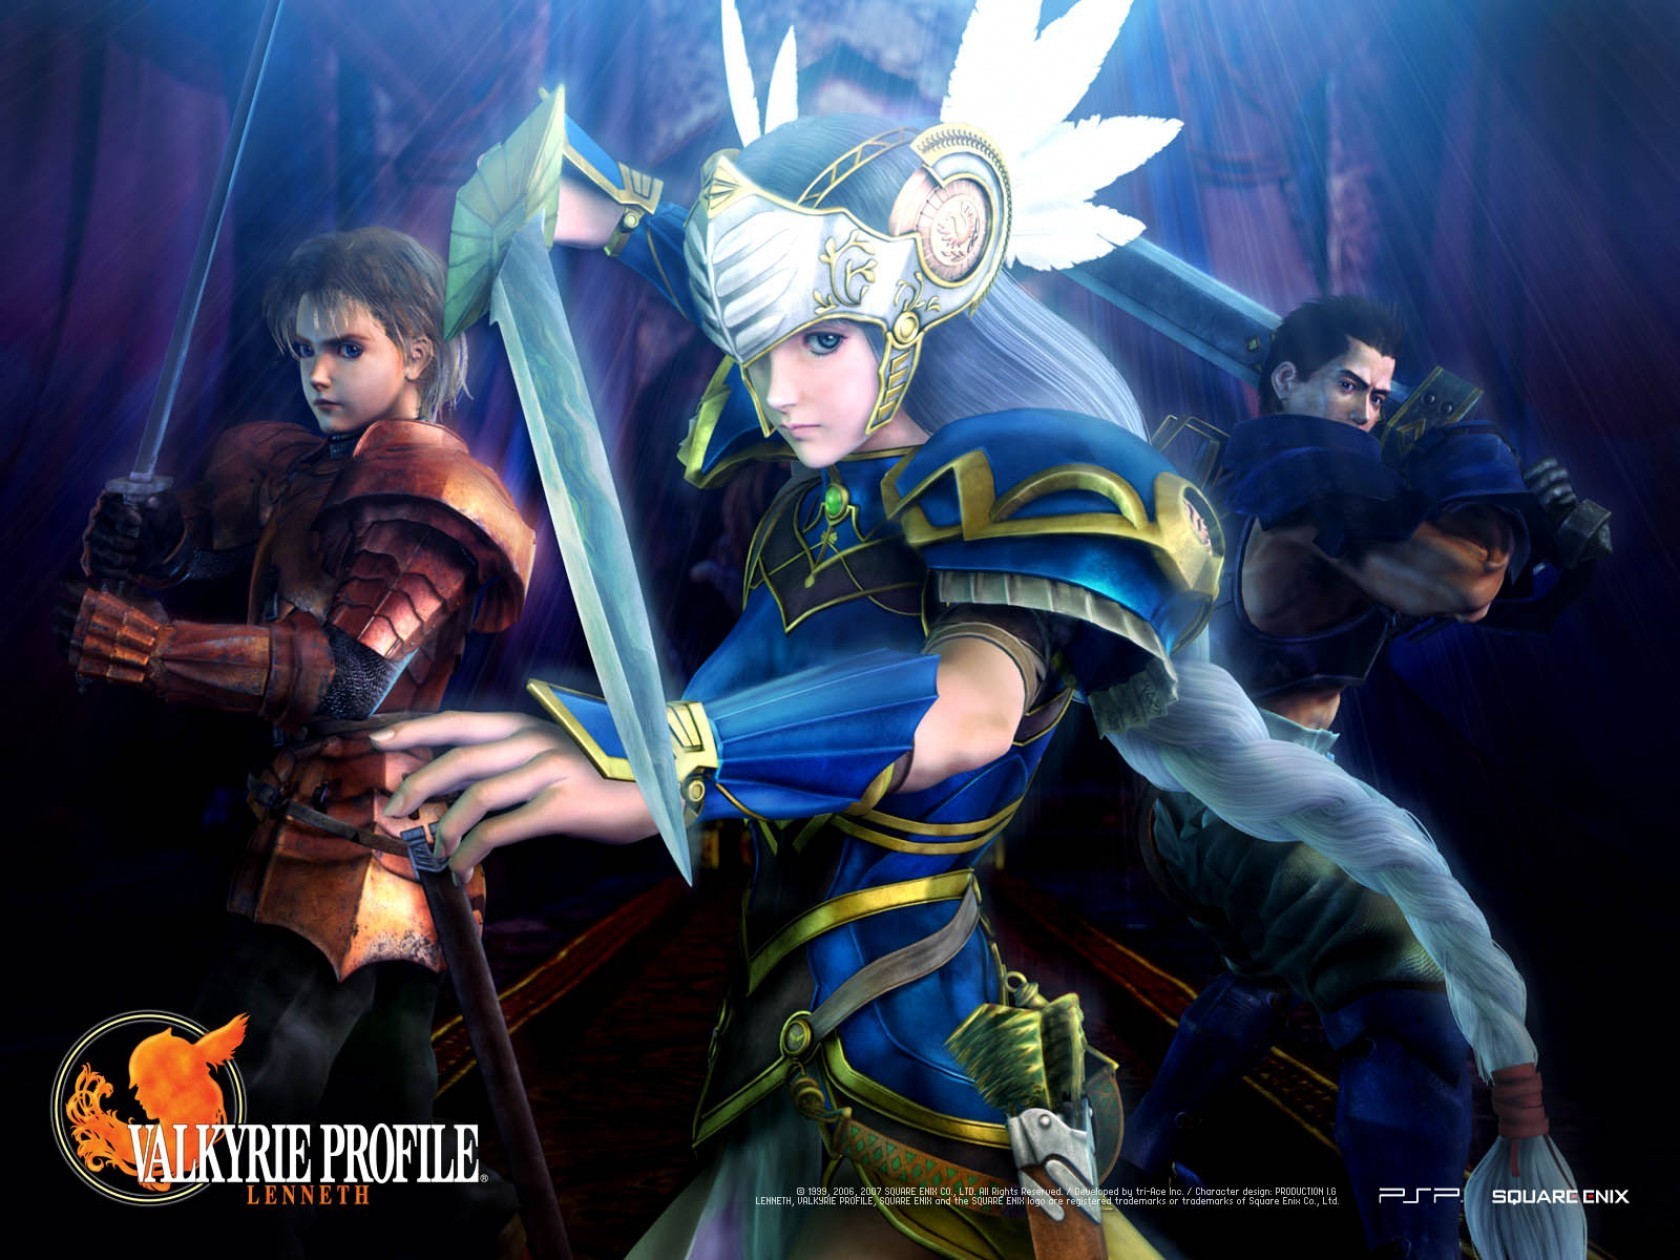 Valkyrie Profil - Lenneth From Valkyrie Profile , HD Wallpaper & Backgrounds